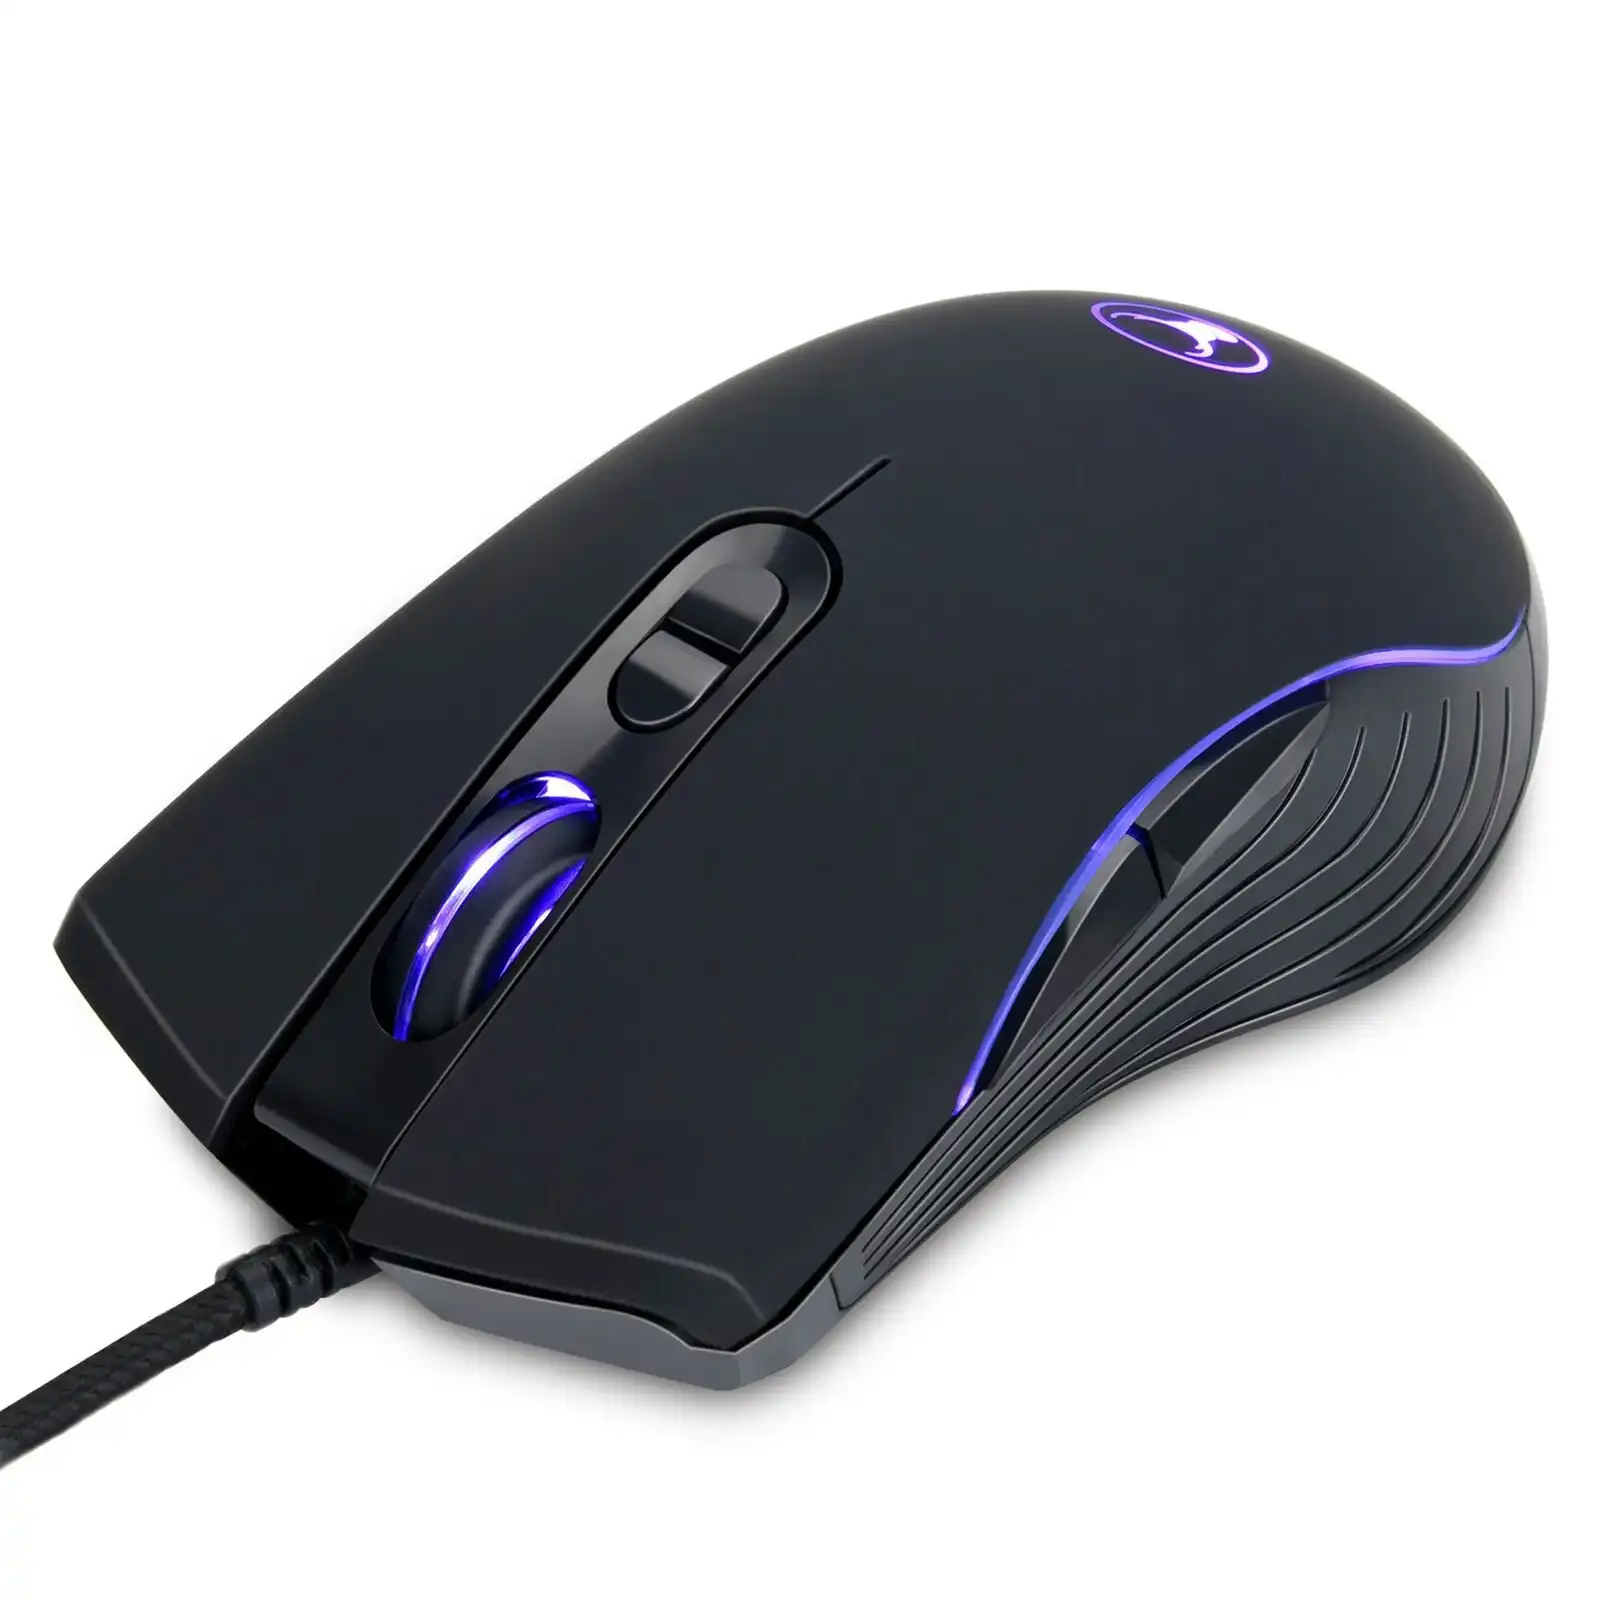 Bonelk X-715 7D RGB LED USB Optical Wired Gaming Mouse 3200DPI for PC/Laptop BLK